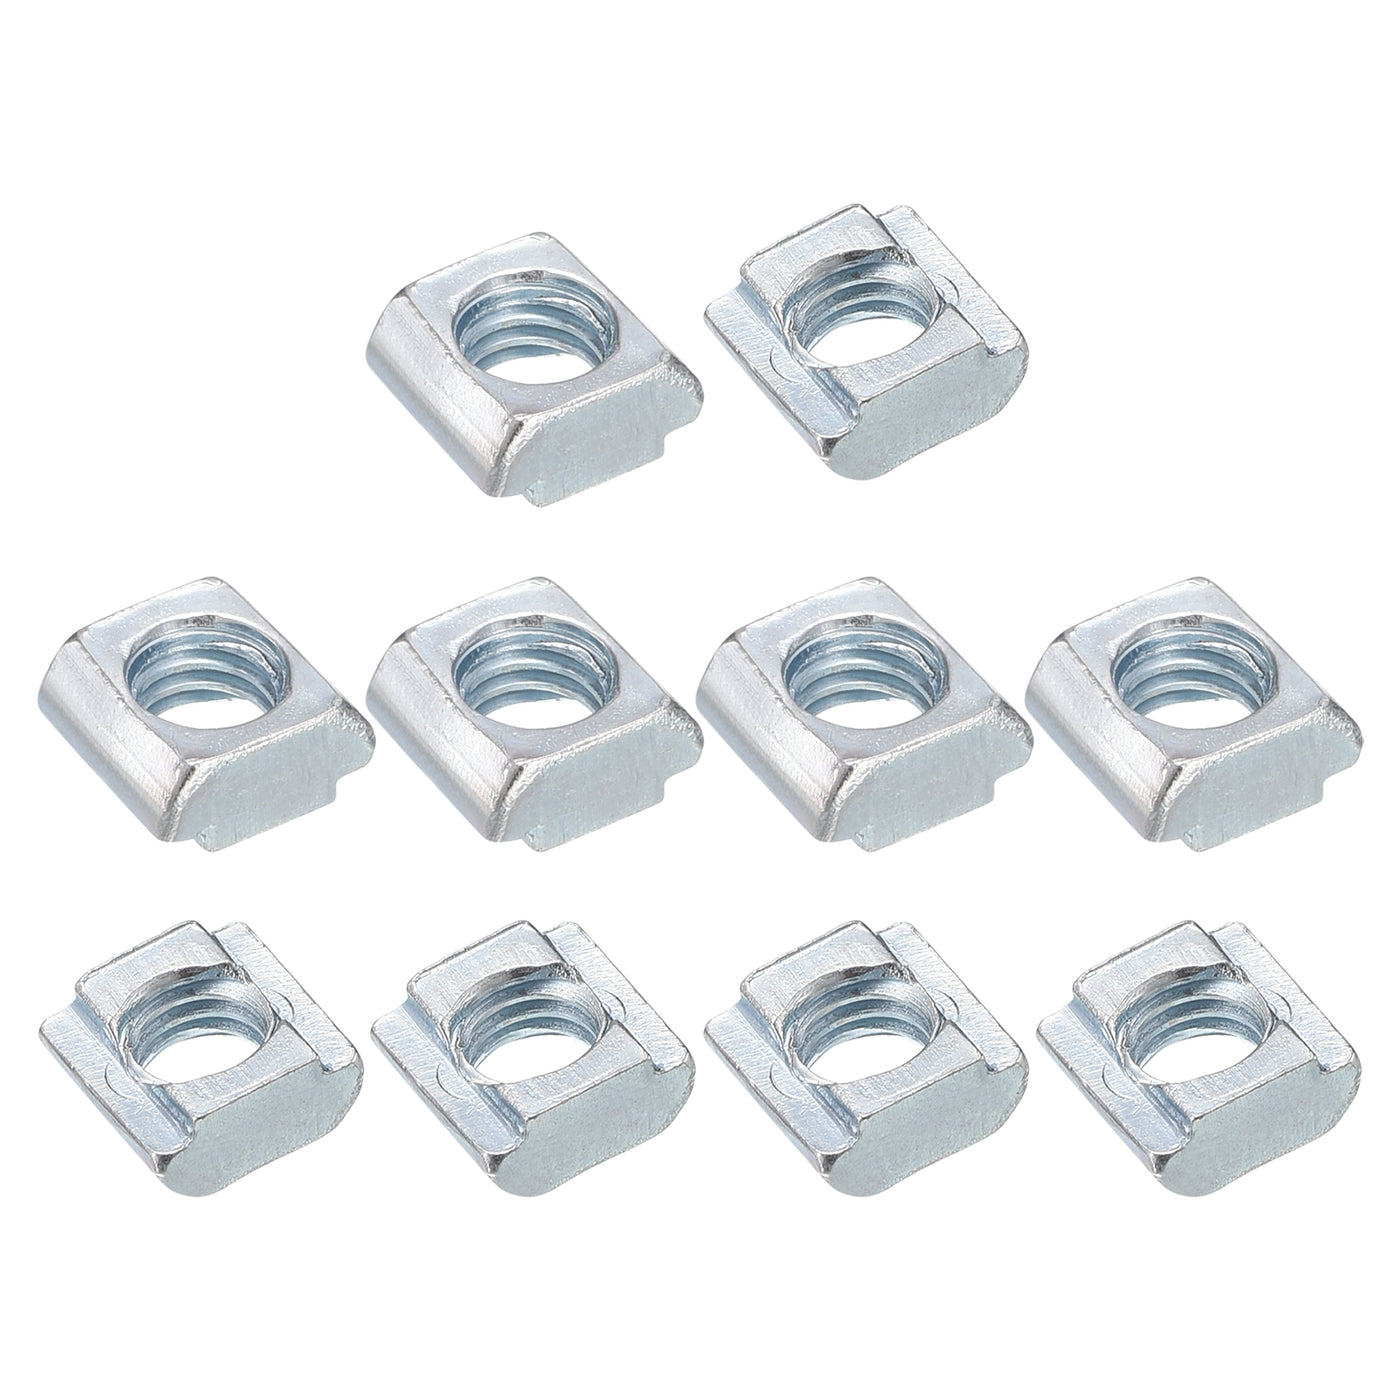 uxcell Uxcell T Nuts, 50pcs - Nickel Plated Carbon Steel T Slot Bolts, 2020 Series M6 Hammer Head Fastener, Sliding T Nuts for Aluminum Extrusion Profile (Silver)